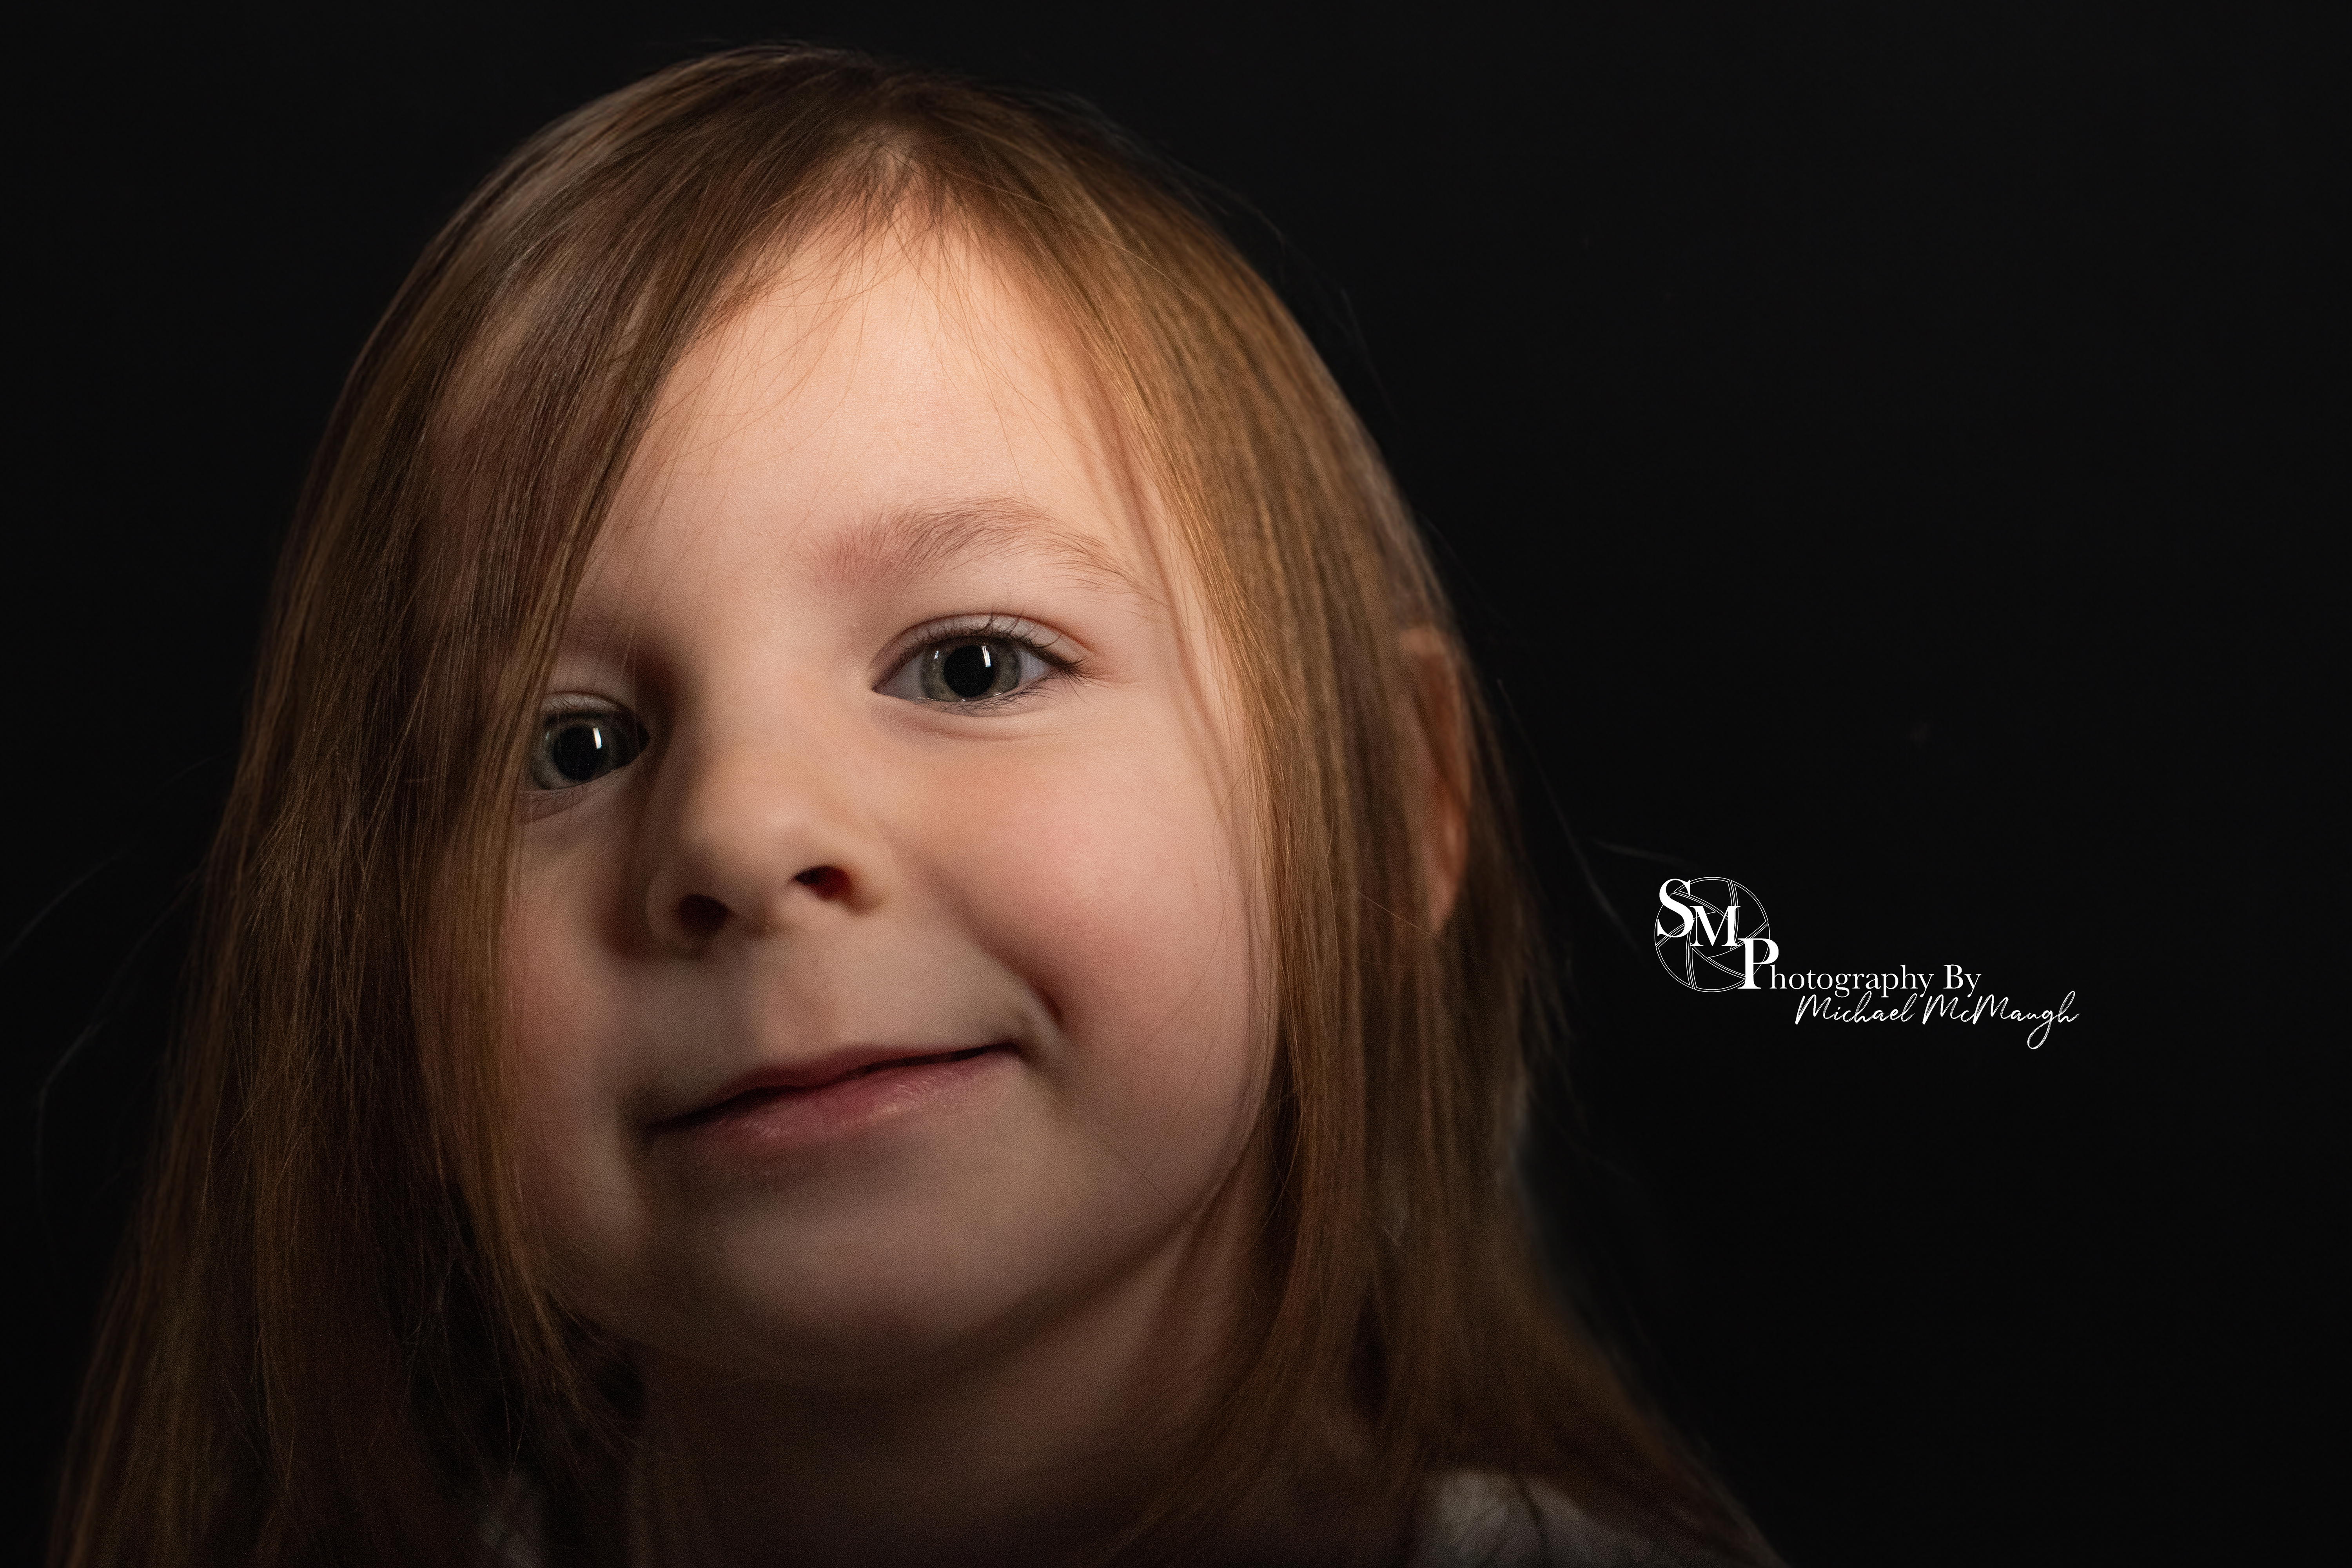 Child Portrait shot by Michael McMaugh of Shuttering Moments. Michael has been a photographer for over 20 years and works in various industries creating content for business and individuals.